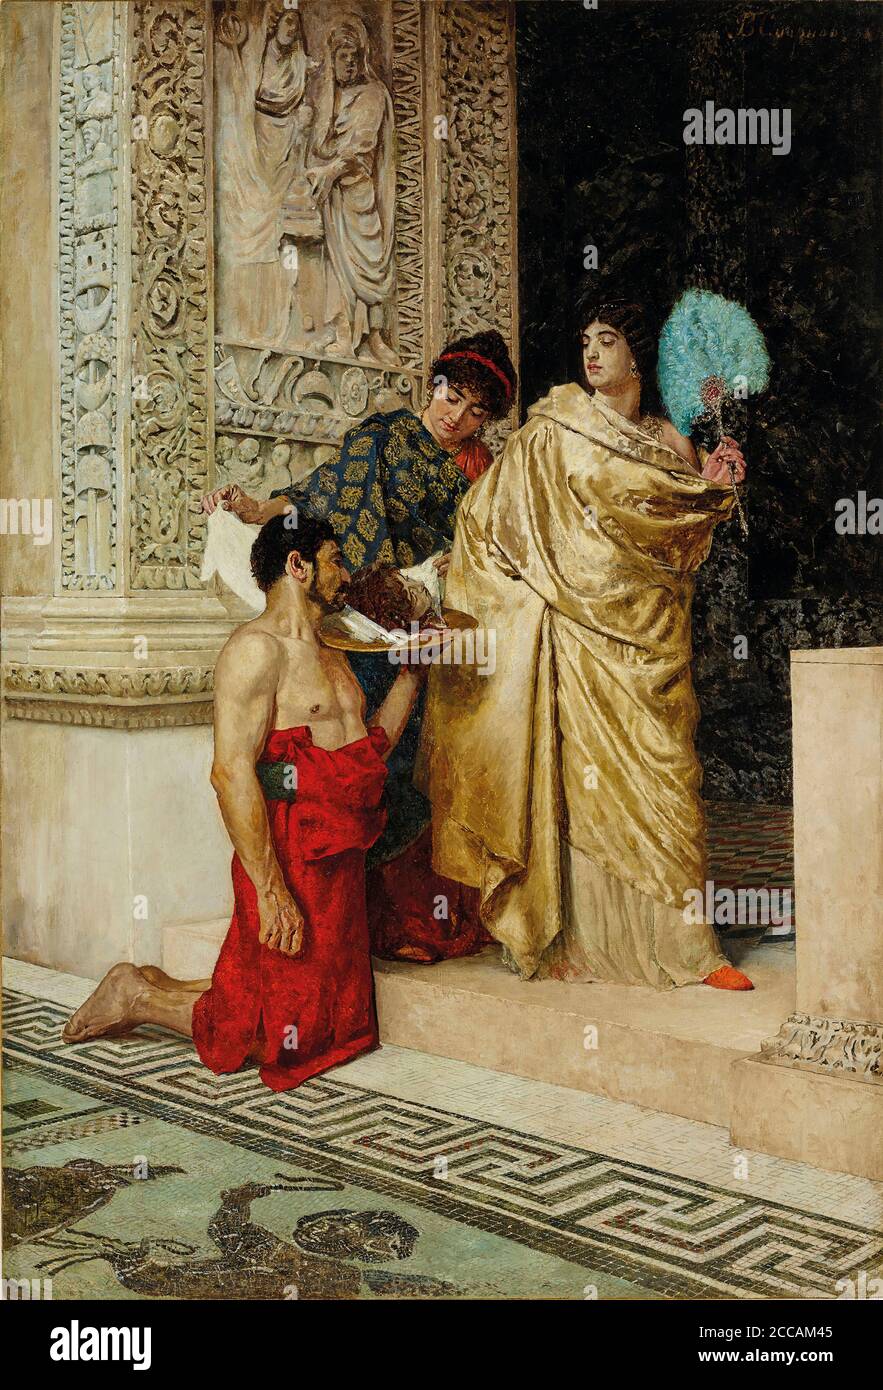 Salome receives the Head of John the Baptist. Museum: PRIVATE COLLECTION. Author: Vasili Sergeevich Smirnov. Stock Photo